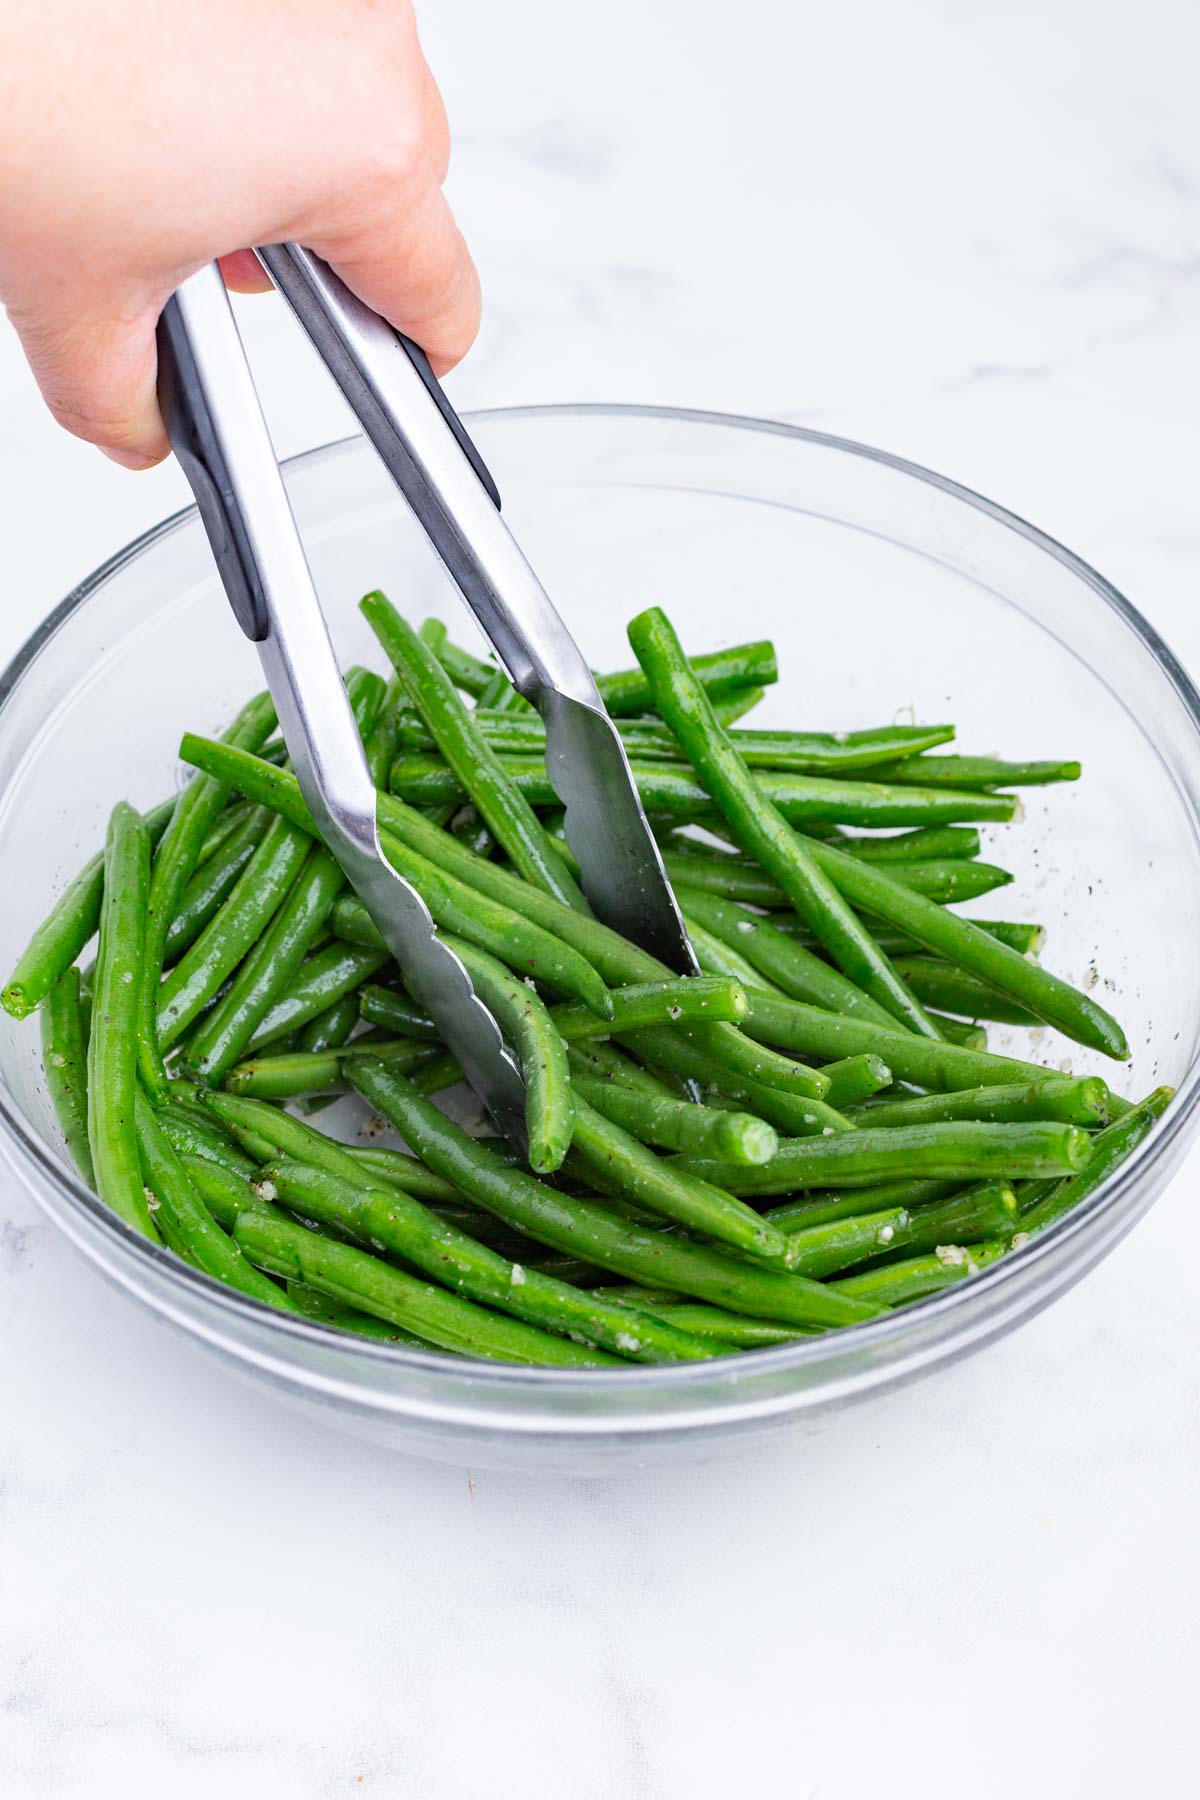 Green beans are tossed with the seasoning mix.